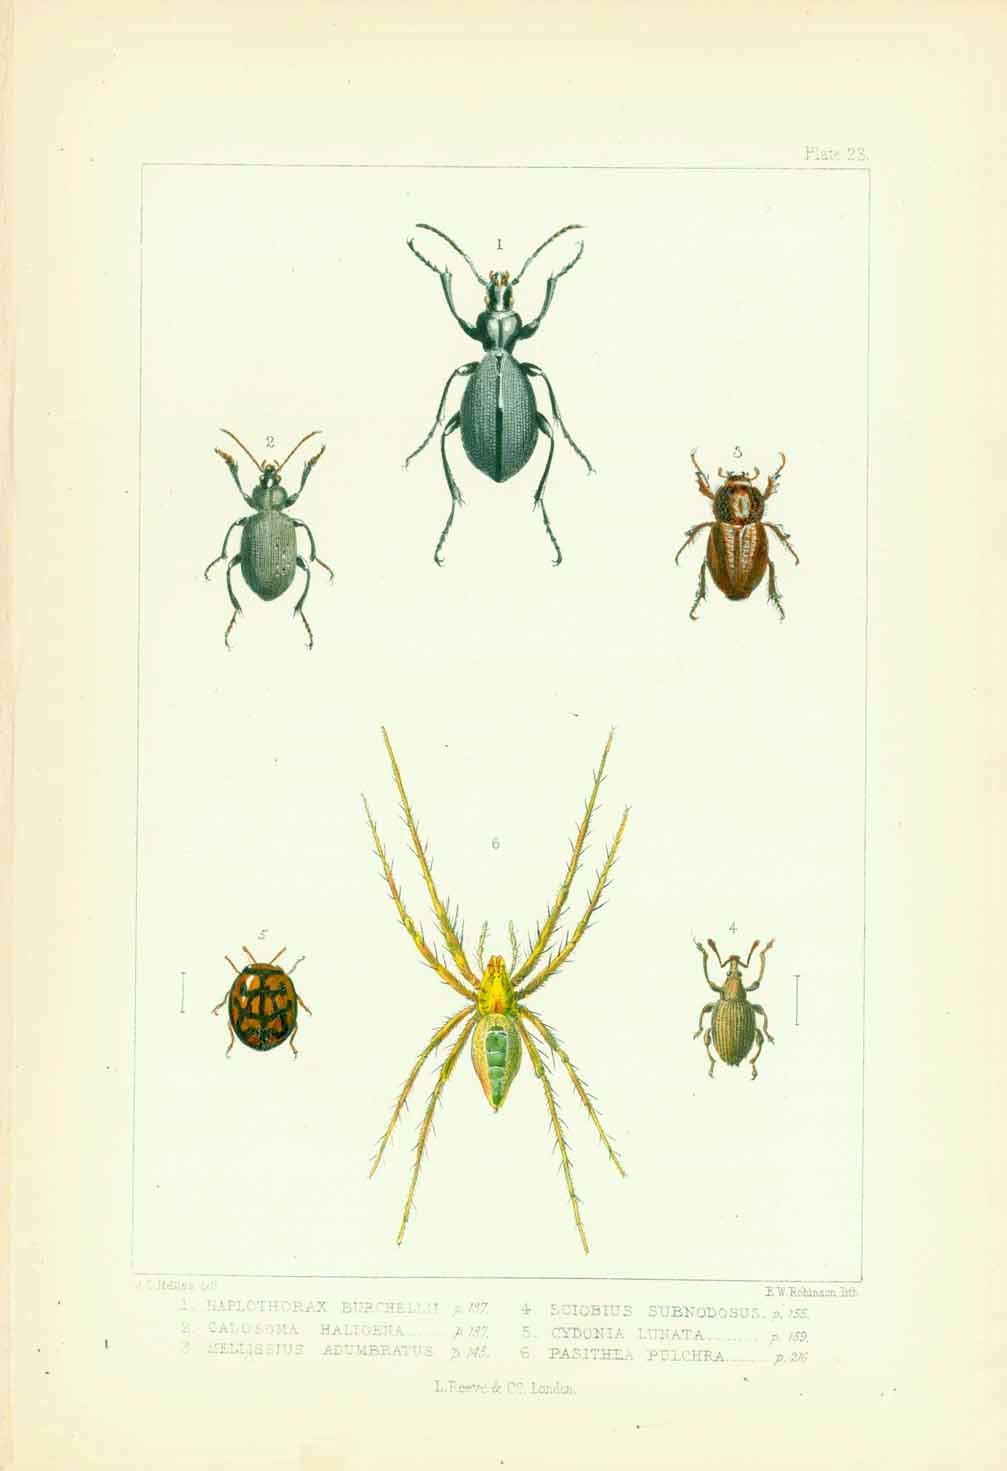 Animals: Beetles and a spider, all indigenous to the Island of St. Helena in the South Atlantic.  Lithograph by Edward W. Robinson after the drawing by John Charles Melliss  Published in "St. Helena"  London, 1875   1 - Haplothorax Burchellii  2 - Calosoma Haligena  3 - Mellissius Adumbratus  4 - Sciobius Subnodosus  5 - Cydonia Lunata  6 - Pasithea Pulchra